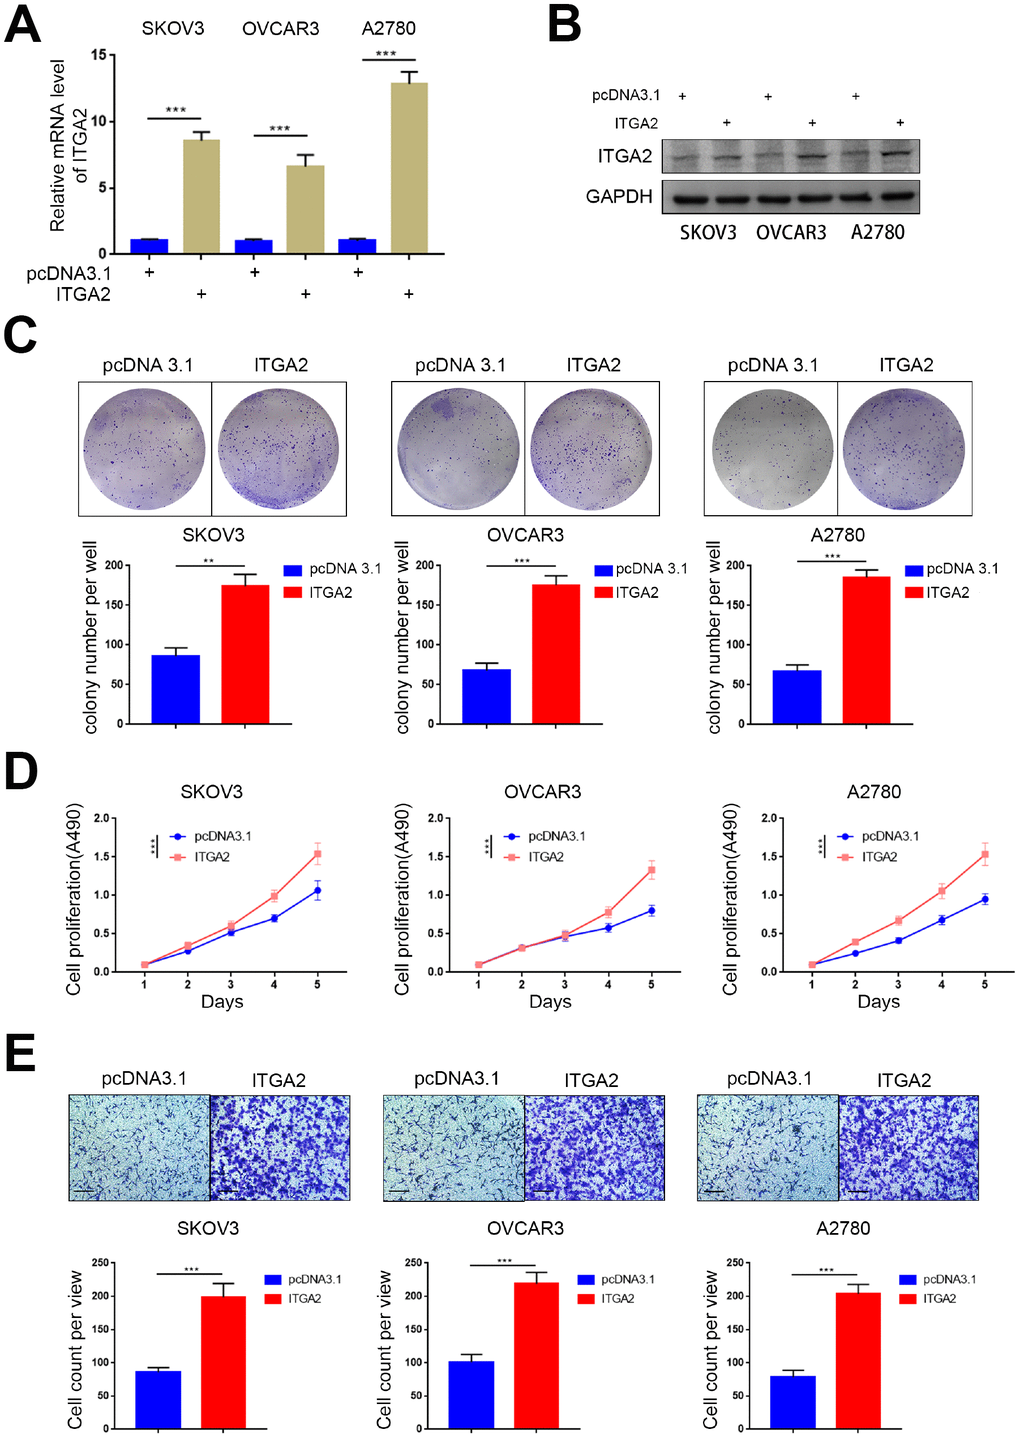 Overexpressed ITGA2 promoted the aggressiveness of ovarian cancer in vitro. (A) SKOV3, OVCAR3, and A2780 cells lines with stably overexpressed ITGA2 were established. RT-PCR assay (A) and Western blot assay (B) were performed in the three cell lines. GAPDH served as an internal reference. Data presented as the mean ± SD of three independent experiments. Each sh-ITGA2 group was compared with sh-Control group. Statistical analyses were performed with one-way ANOVA followed by Tukey's multiple comparison's tests. ***, P C–E) SKOV3, OVCAR3, and A2780 cells lines with stably overexpressed ITGA2 were established. The cells were harvested for colony formation assay (C), MTS assay (D), and migration assay (E). For e, representative images of migrated cells were shown based on a transwell assay. Each bar represents the mean ± SD of three to five independent experiments. Each sh-ITGA2 group was compared with sh-Control group. Statistical analyses were performed with one-way ANOVA followed by Tukey's multiple comparison's tests. **, P 